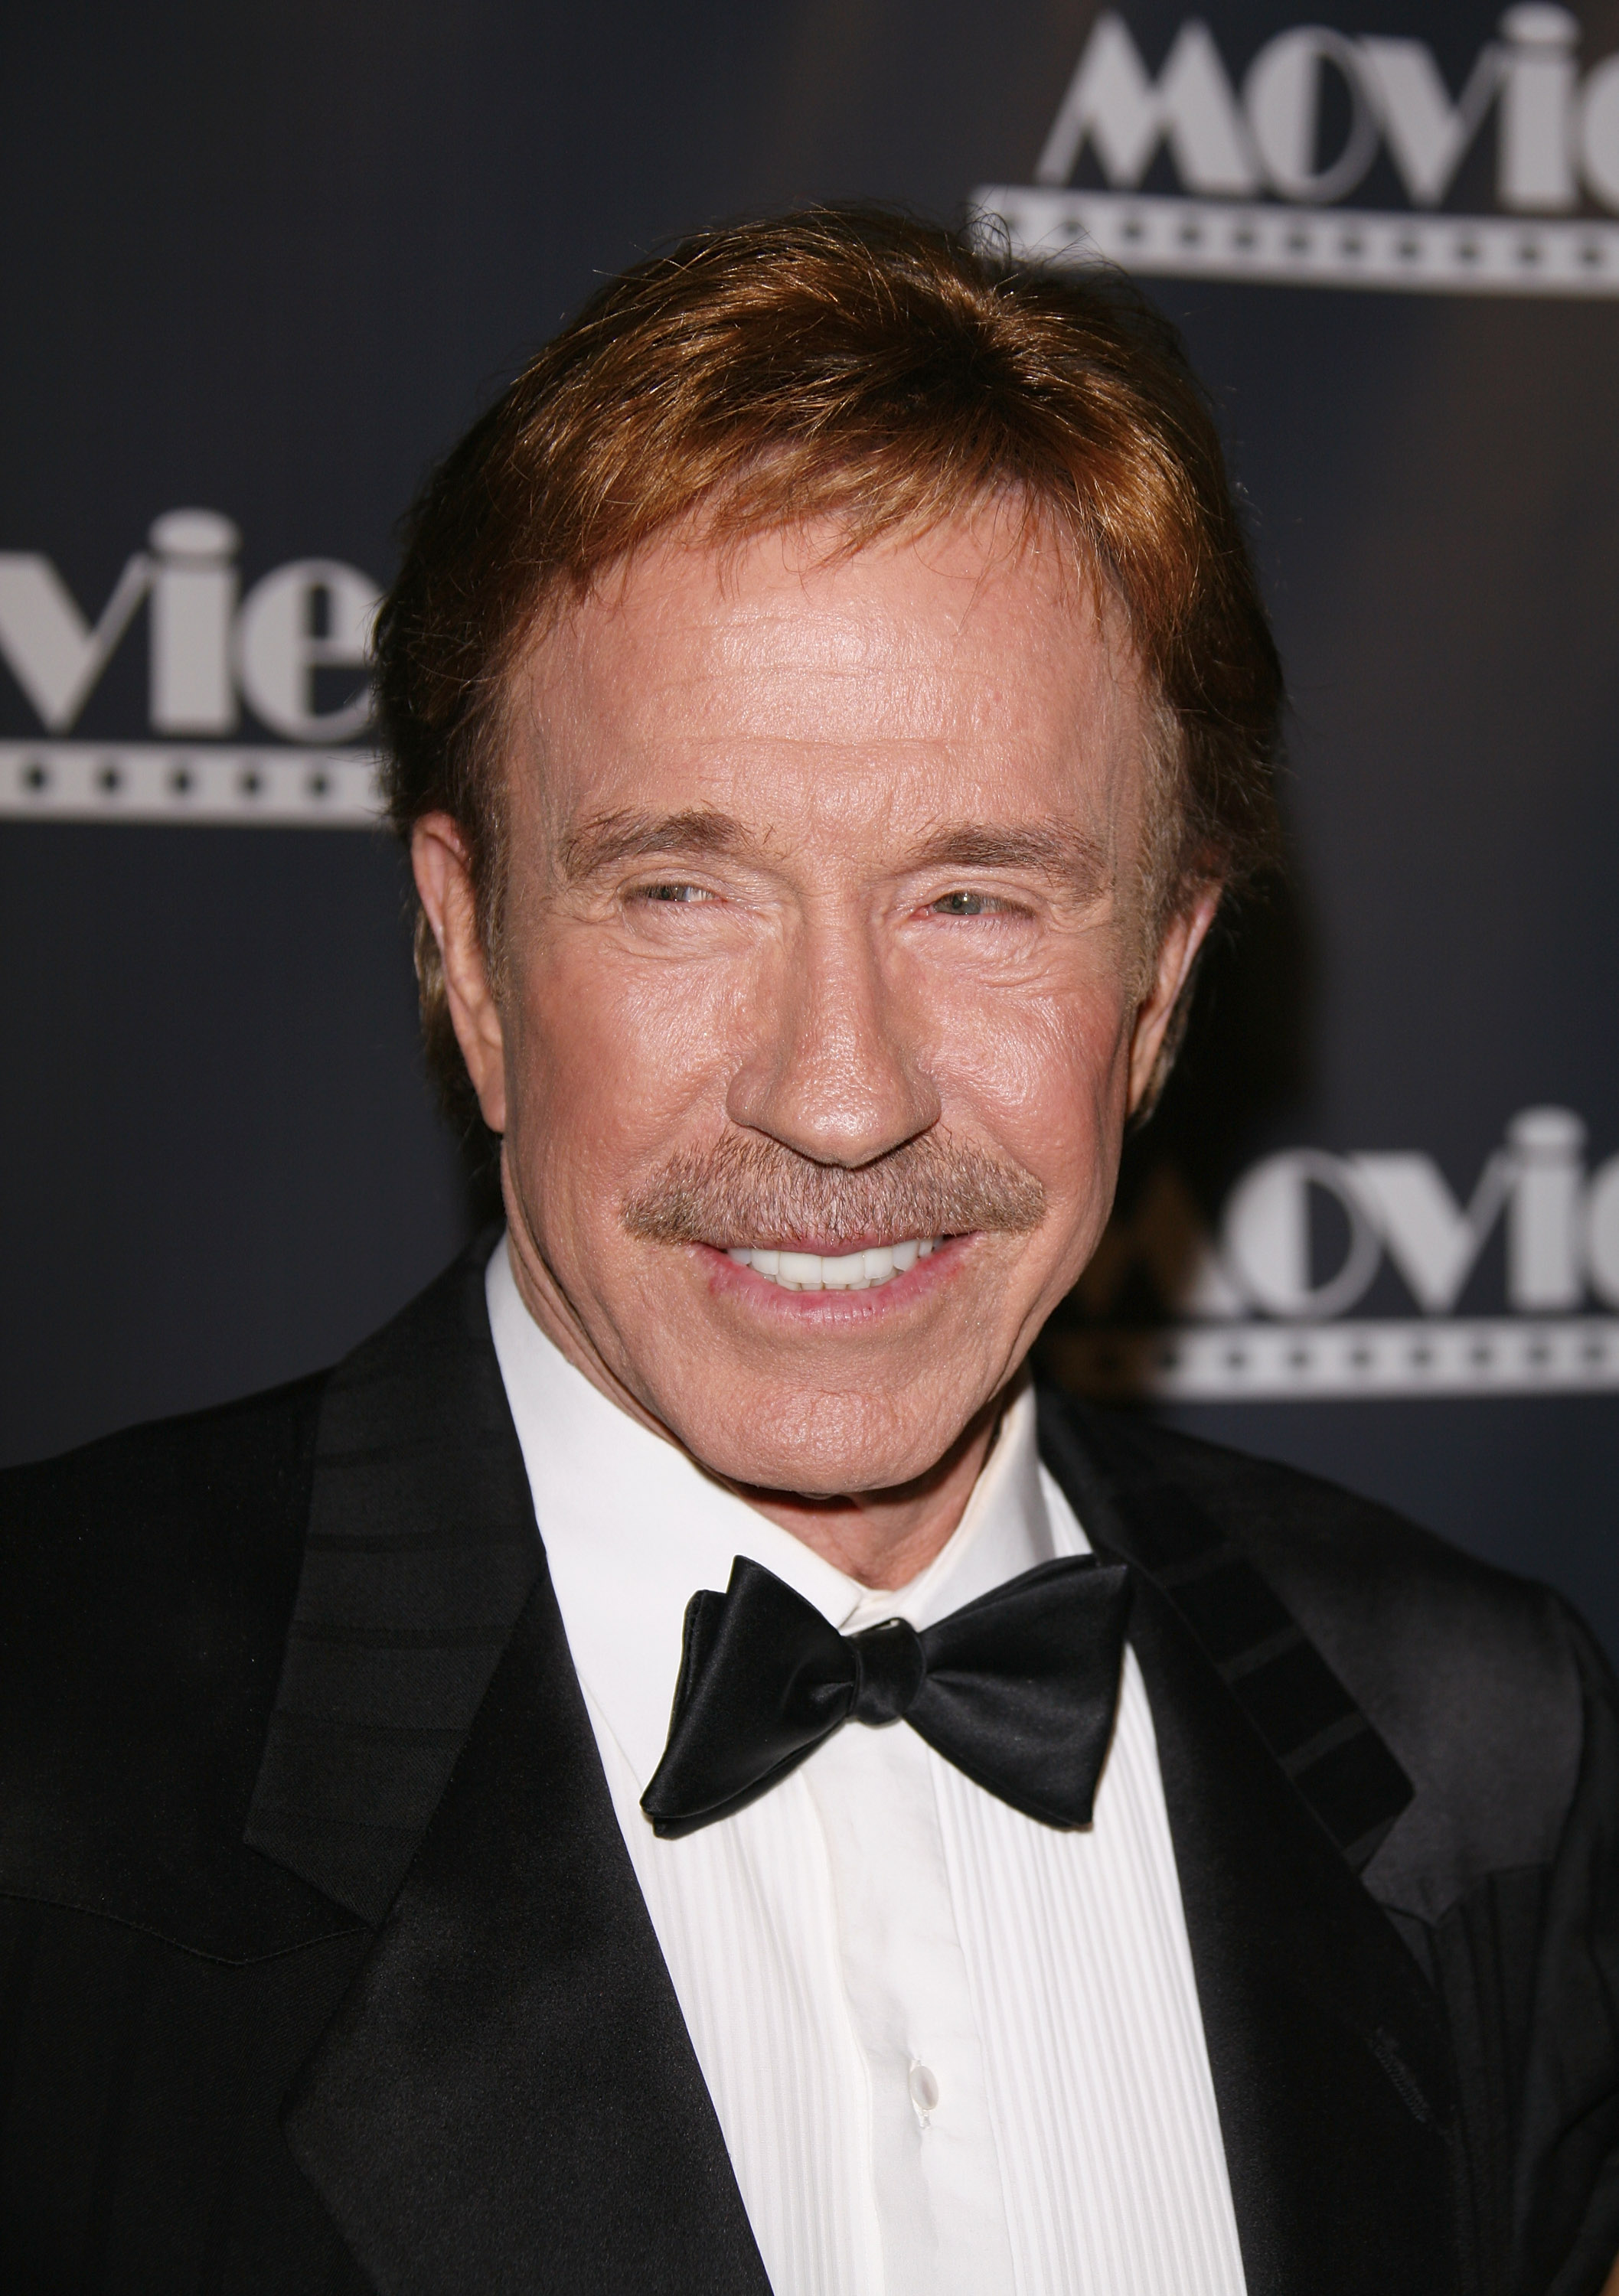 Chuck Norris arrives at the 17th Annual Movieguide Faith and Values Awards Gala at the Beverly Hilton Hotel in Beverly Hills, California, on February 11, 2009. | Source: Getty Images